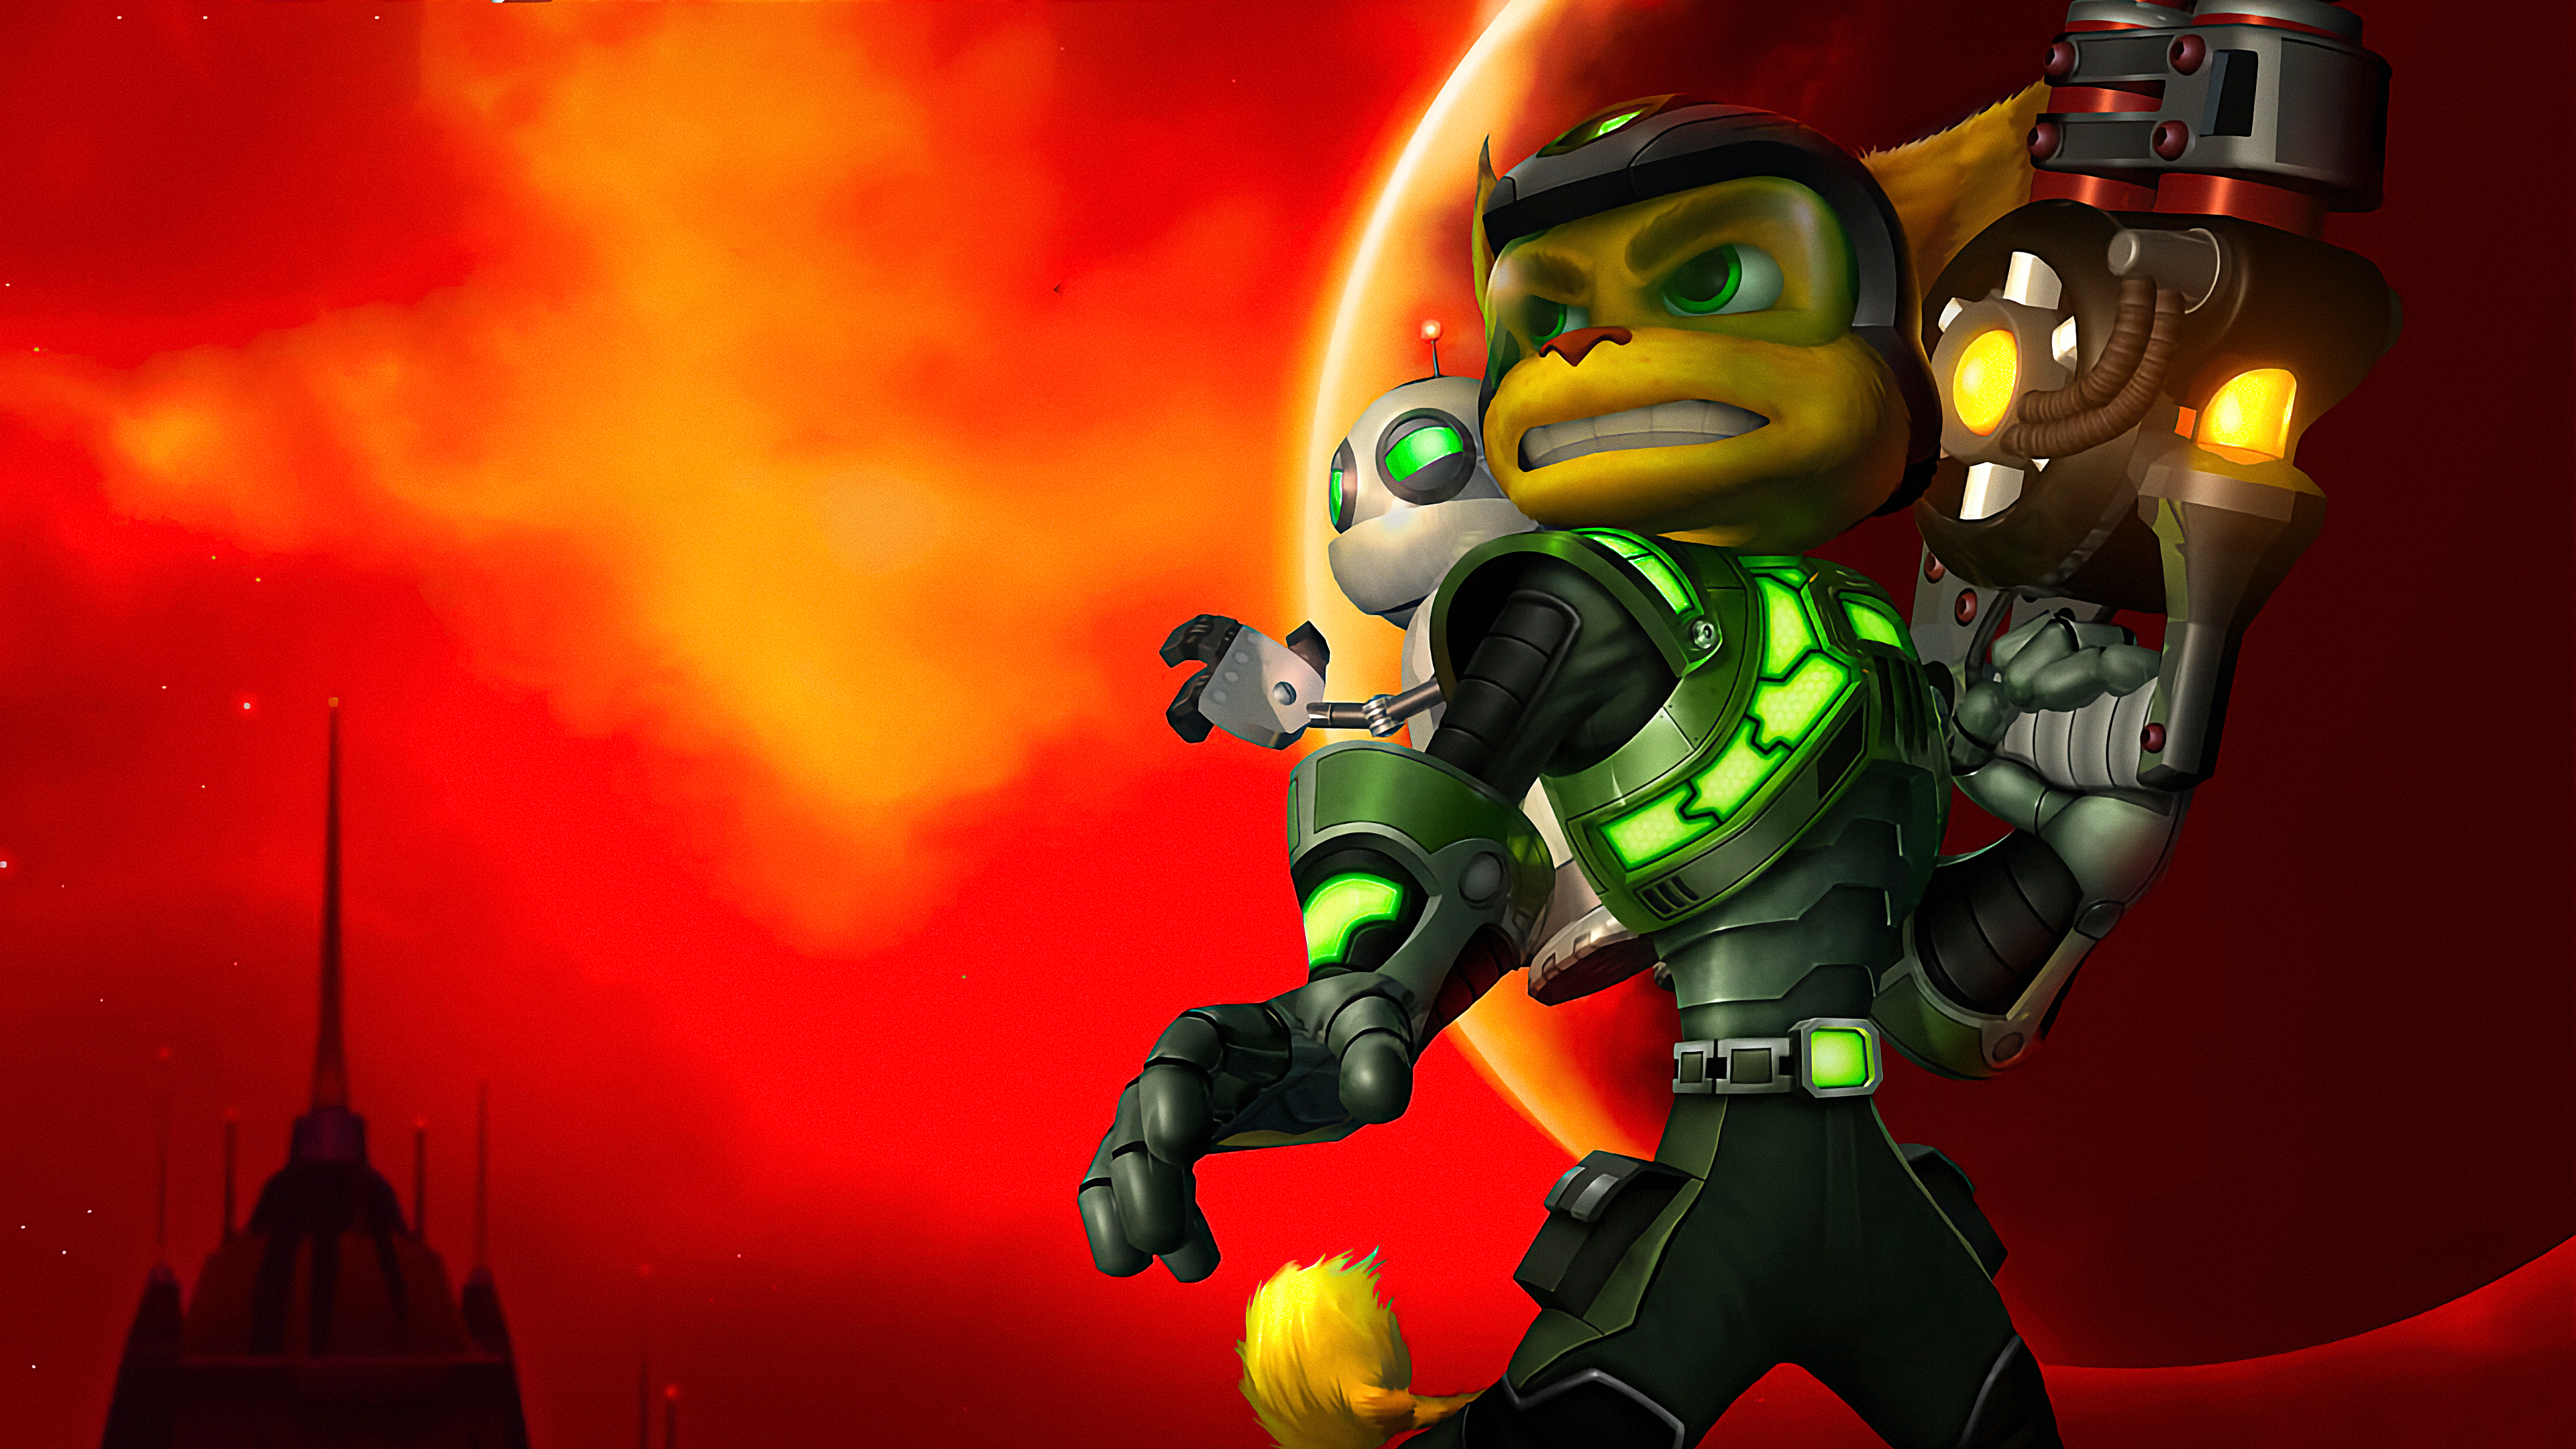 Ratchet Clank PlayStation 2 Video Game Heroes Digital Art Video Games 3840x2160